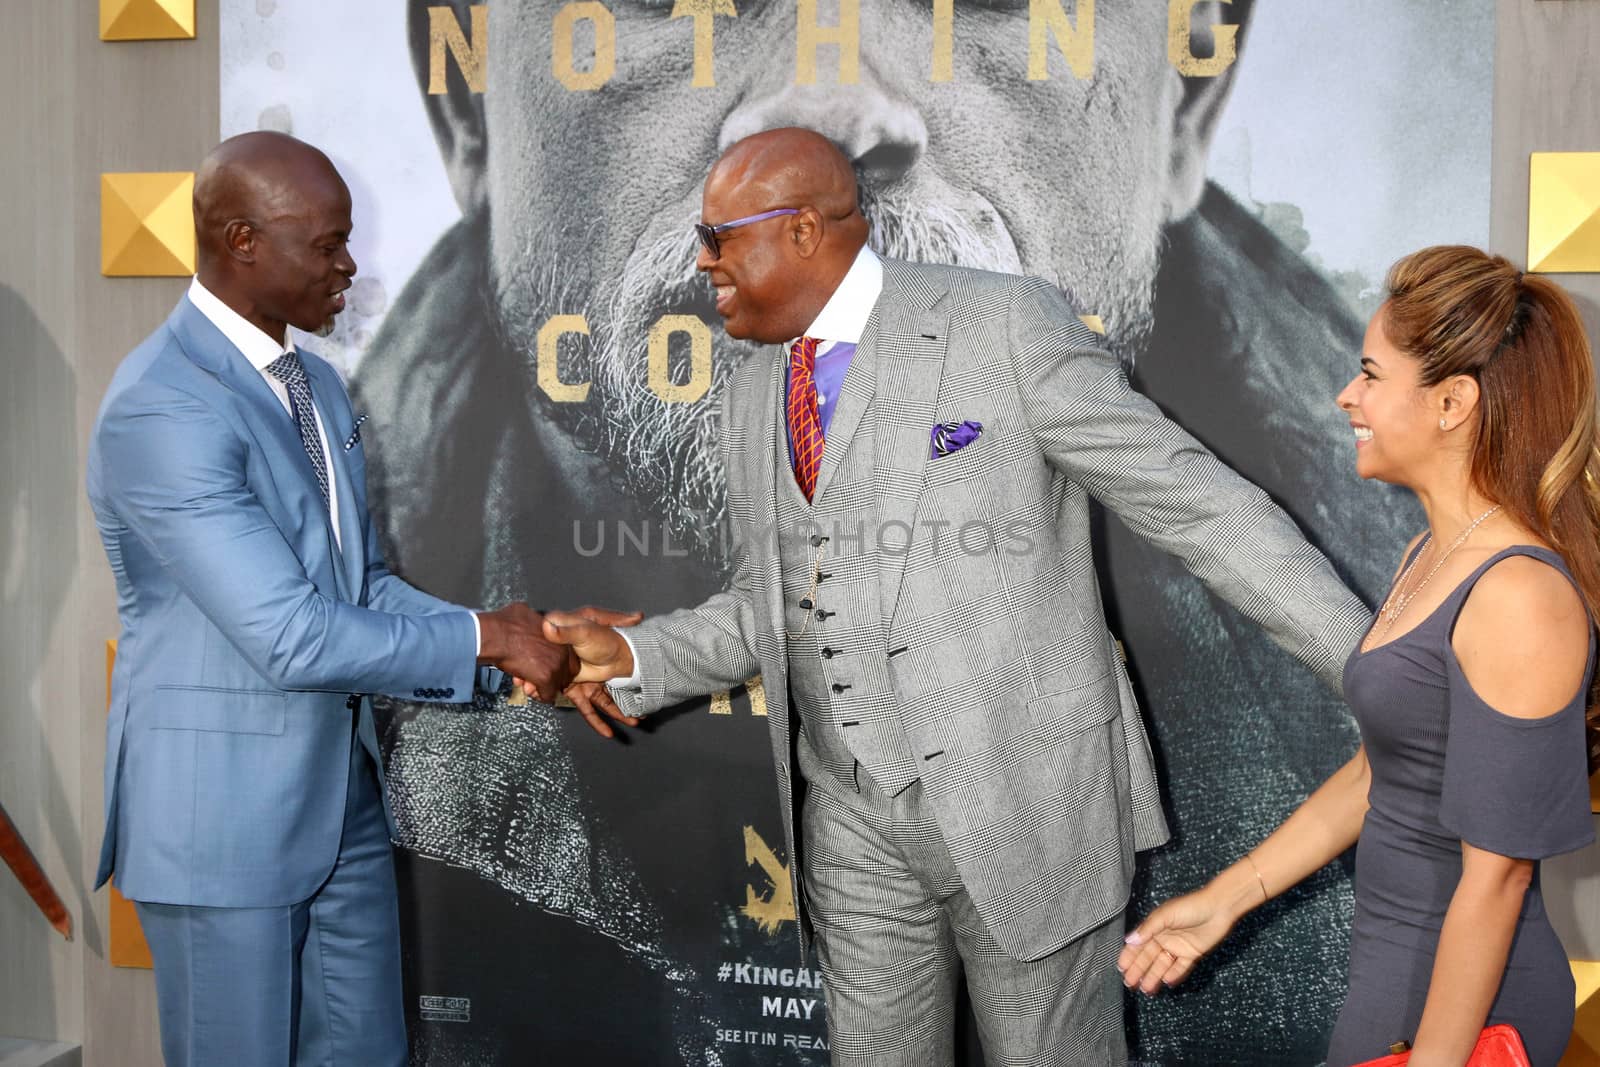 Djimon Hounsou, Chi McBride, Julissa McBride
at the "King Arthur Legend of the Sword" World Premiere, TCL Chinese Theater IMAX, Hollywood, CA 05-08-17/ImageCollect by ImageCollect